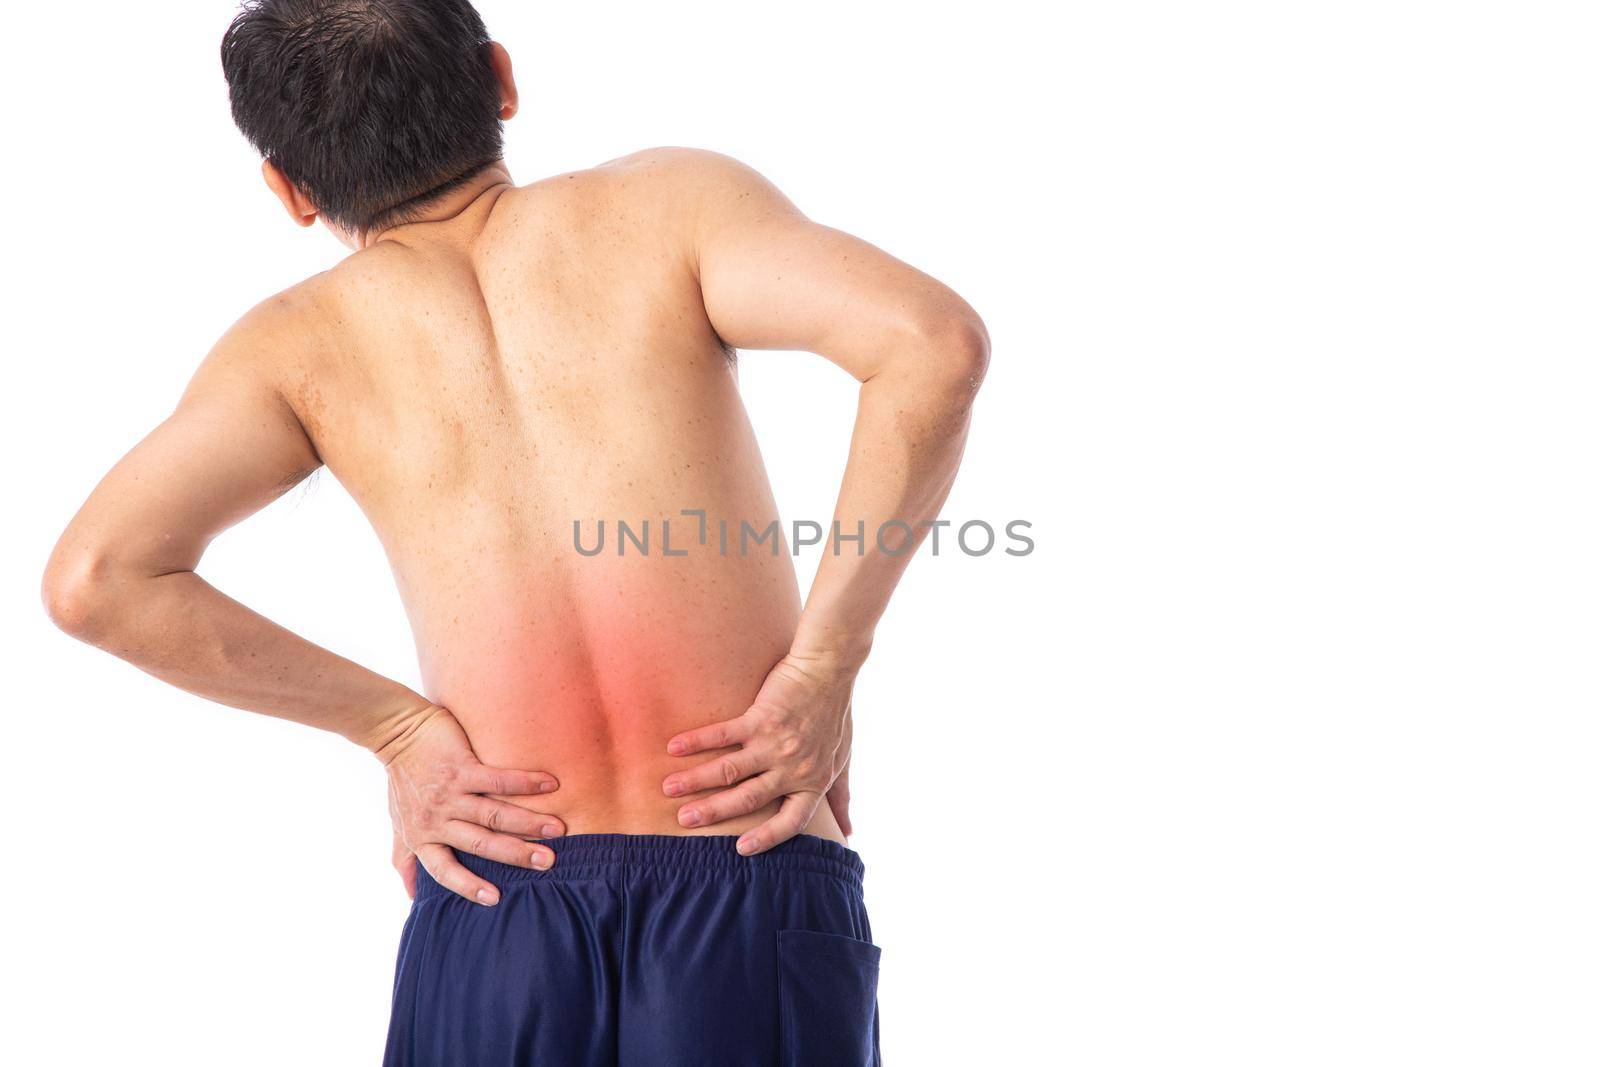 Sore pain of lower back or spine. Sprain and arthritis symptoms. middle age man holding his hurt lower back over white background.